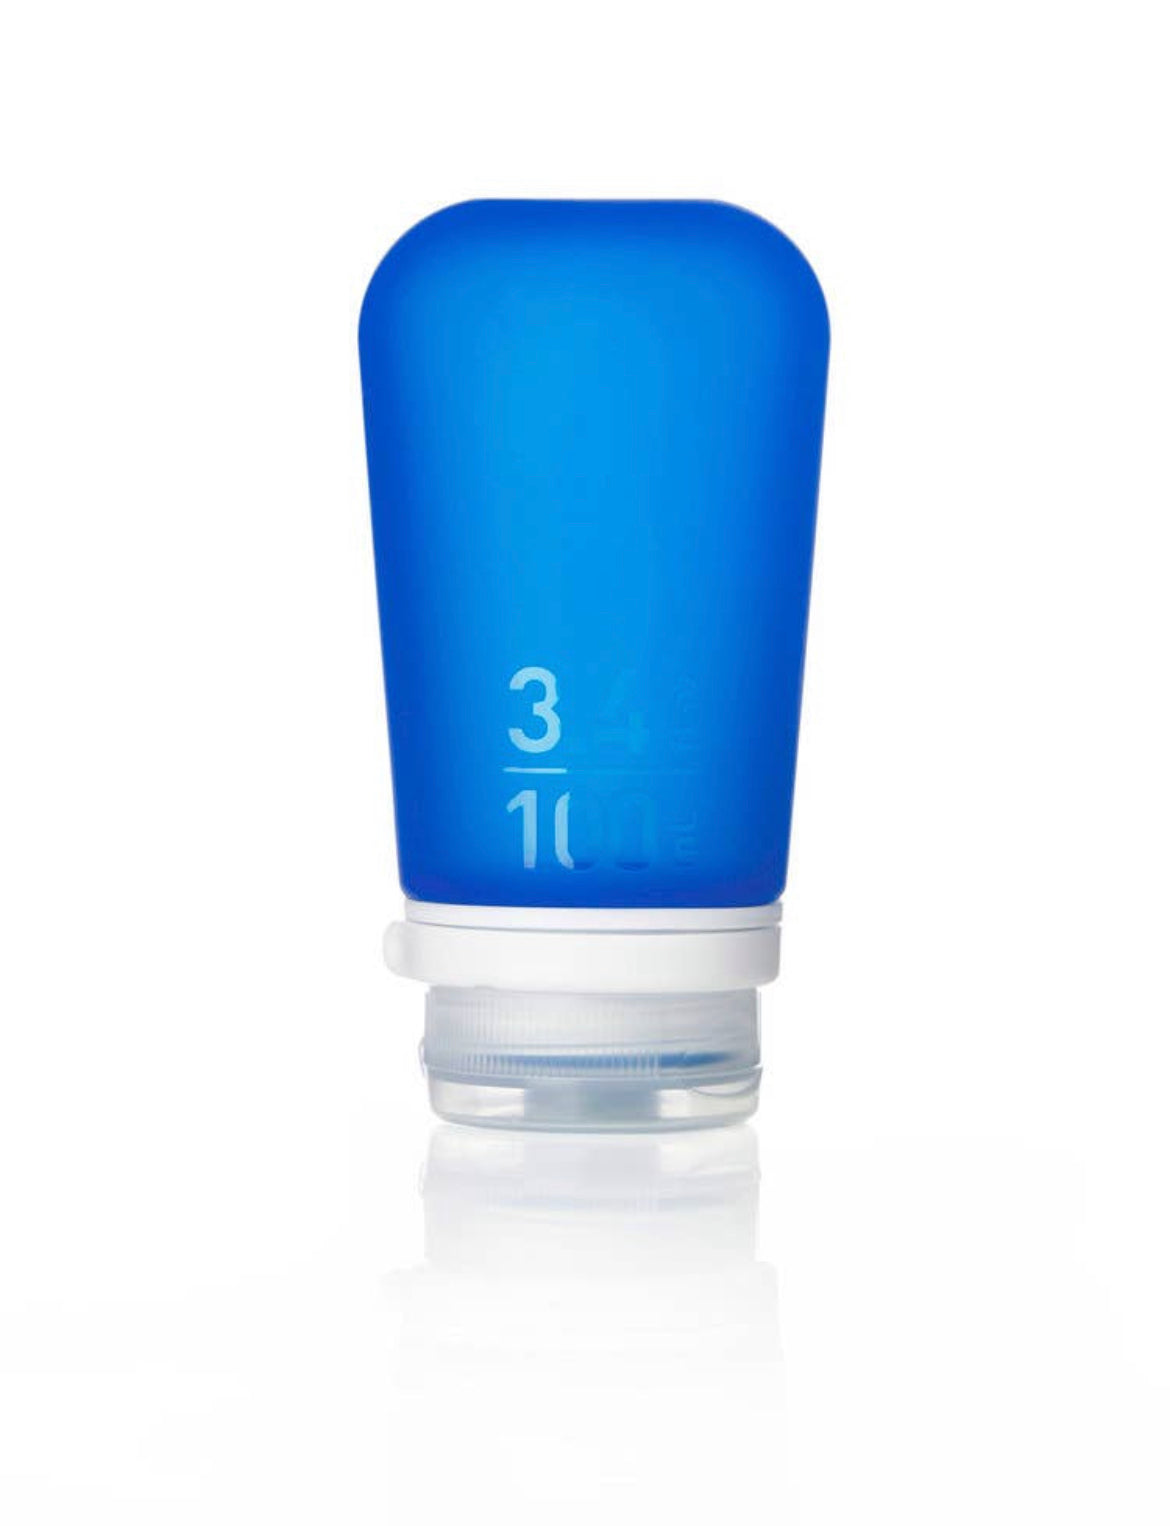 Humangear- 3.4 oz  GoToob+ Silicone Toiletry 3-1-1 Bottle (LARGE) - Assorted Colors